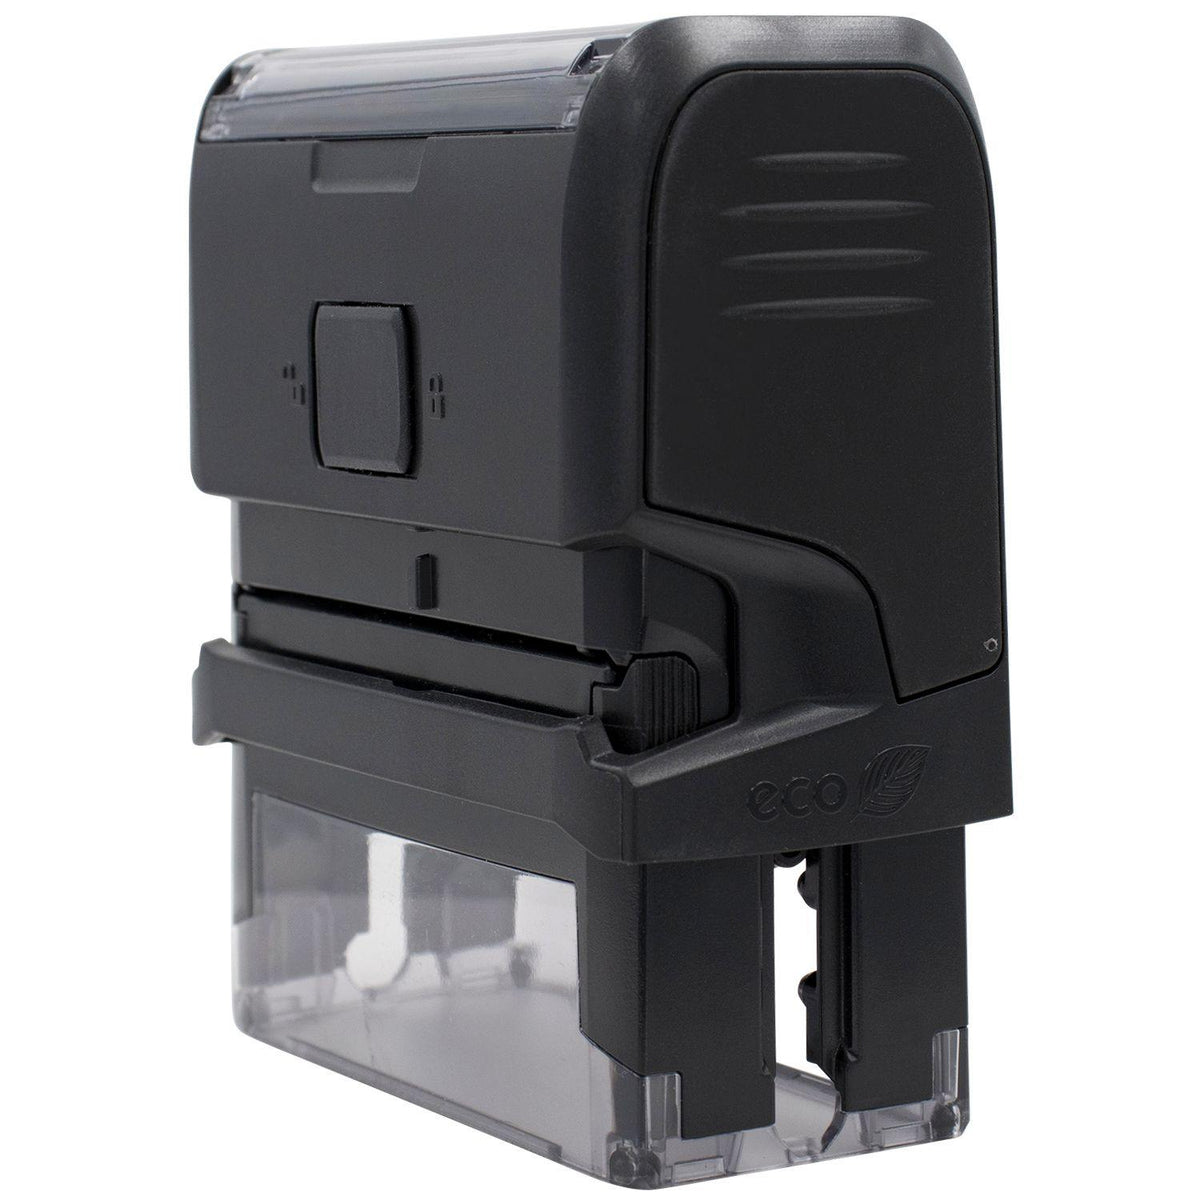 Large Self-Inking Strikeout Stamp - Engineer Seal Stamps - Brand_Trodat, Impression Size_Large, Stamp Type_Self-Inking Stamp, Type of Use_General, Type of Use_Legal, Type of Use_Office